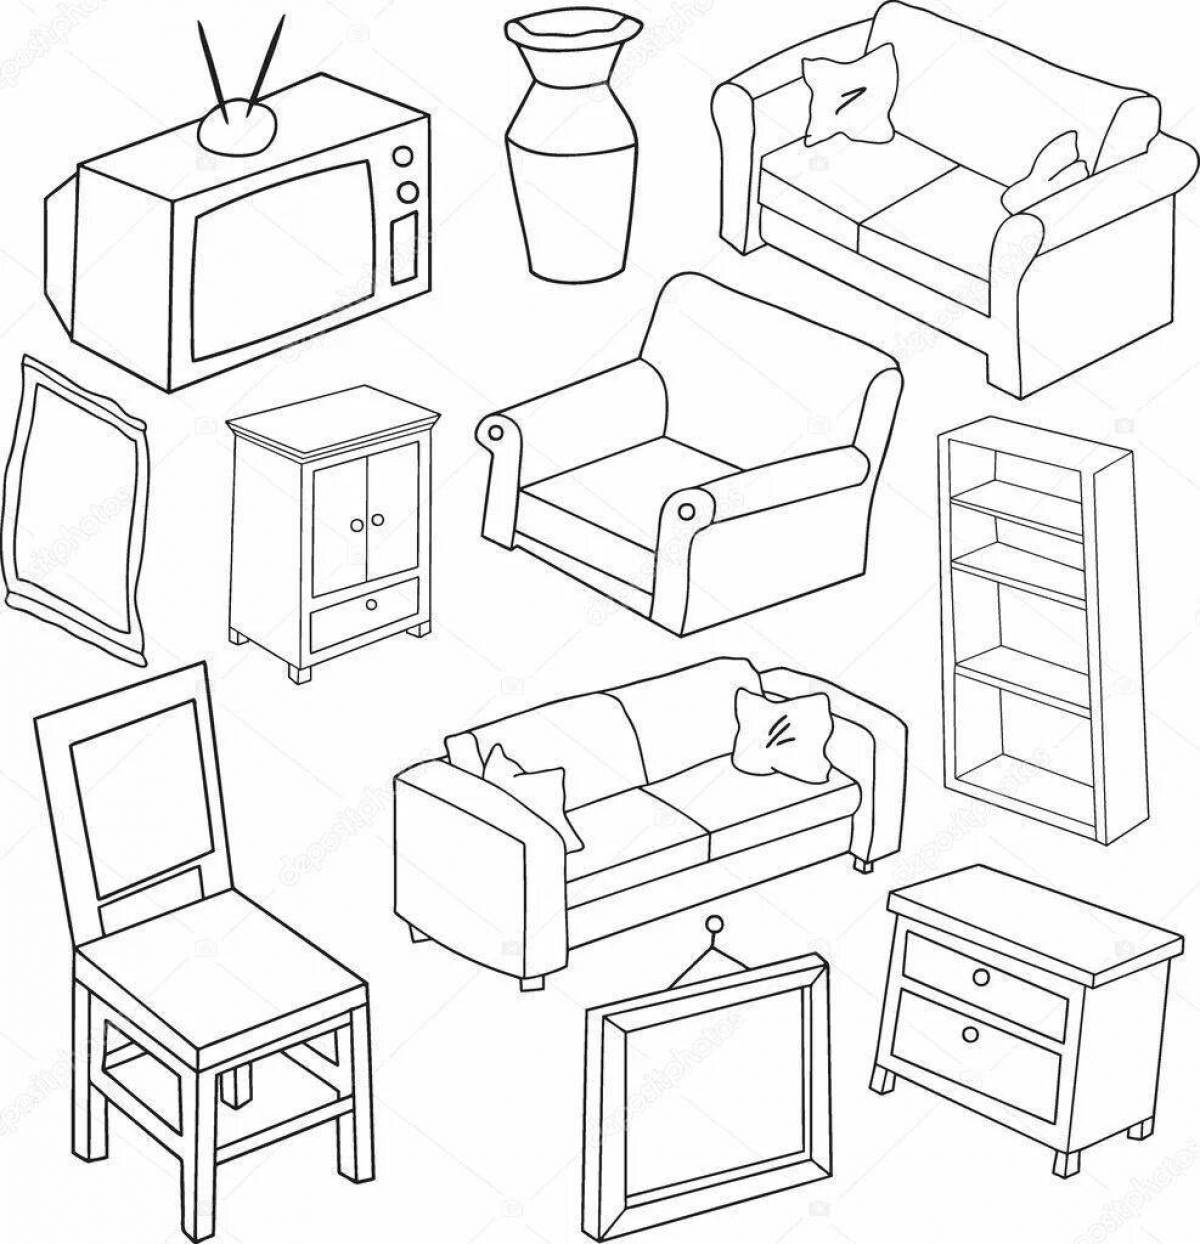 Cute doll furniture coloring page